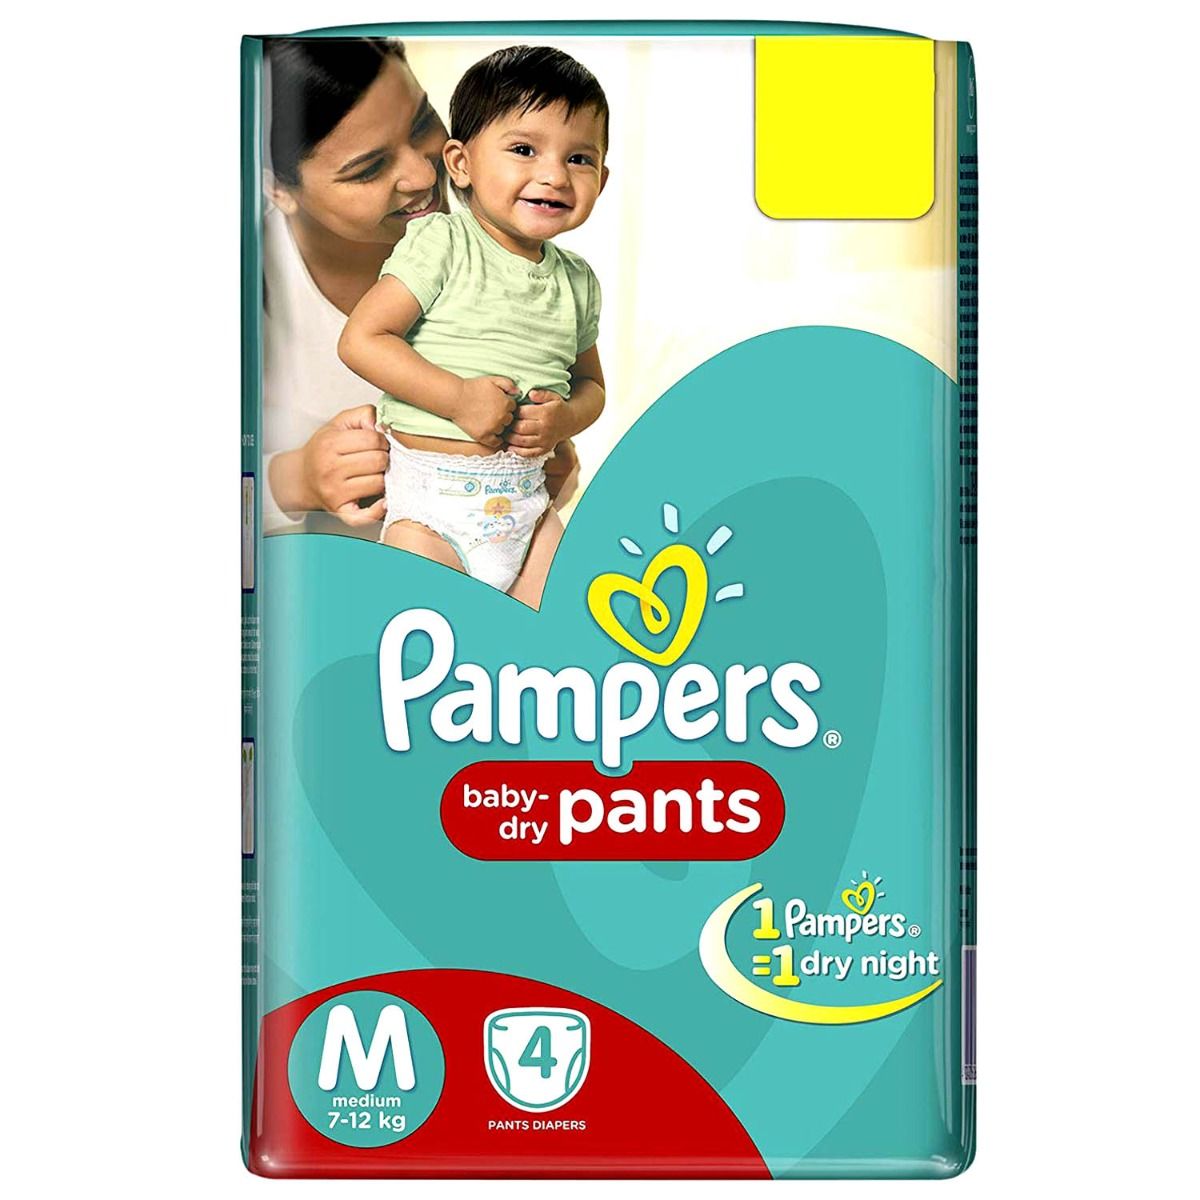 Pampers Baby-Dry Diaper Pants Medium, 4 Count, Pack of 1 